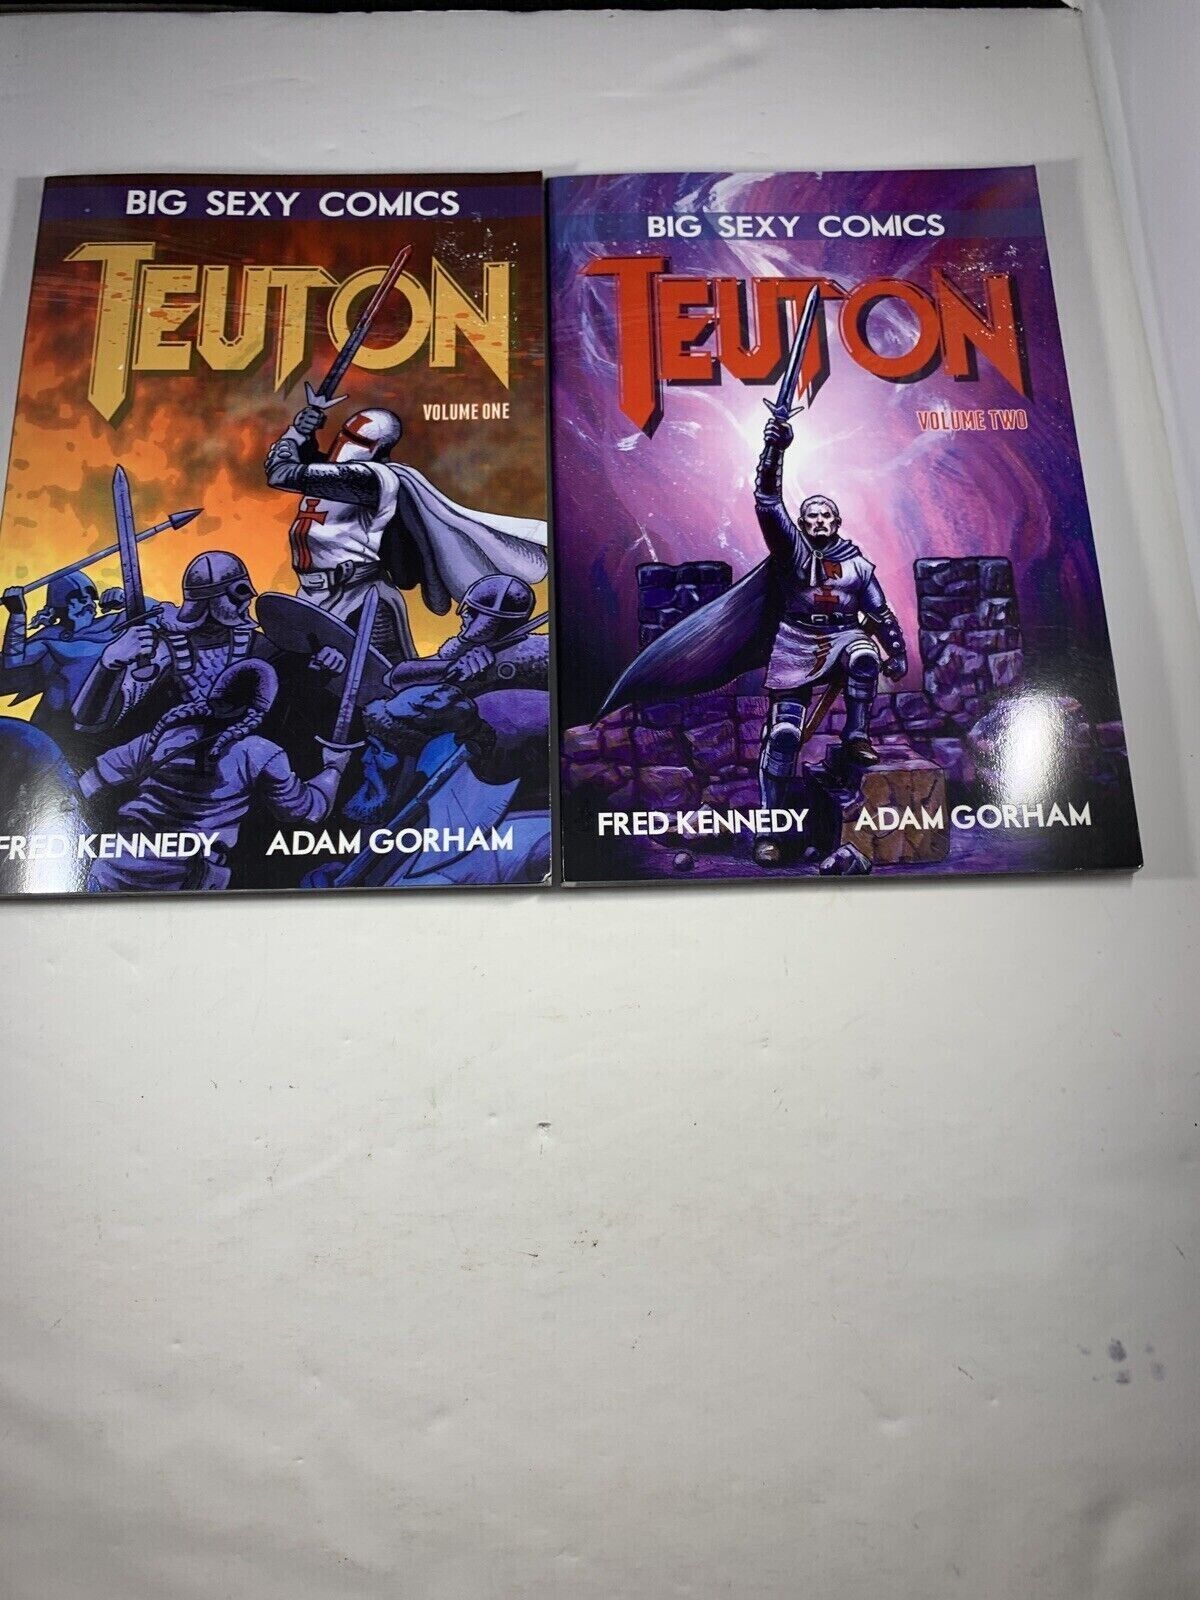 Kennedy Gorham Teuton Volume 1 And 2 SIGNED Big Sexy Comics